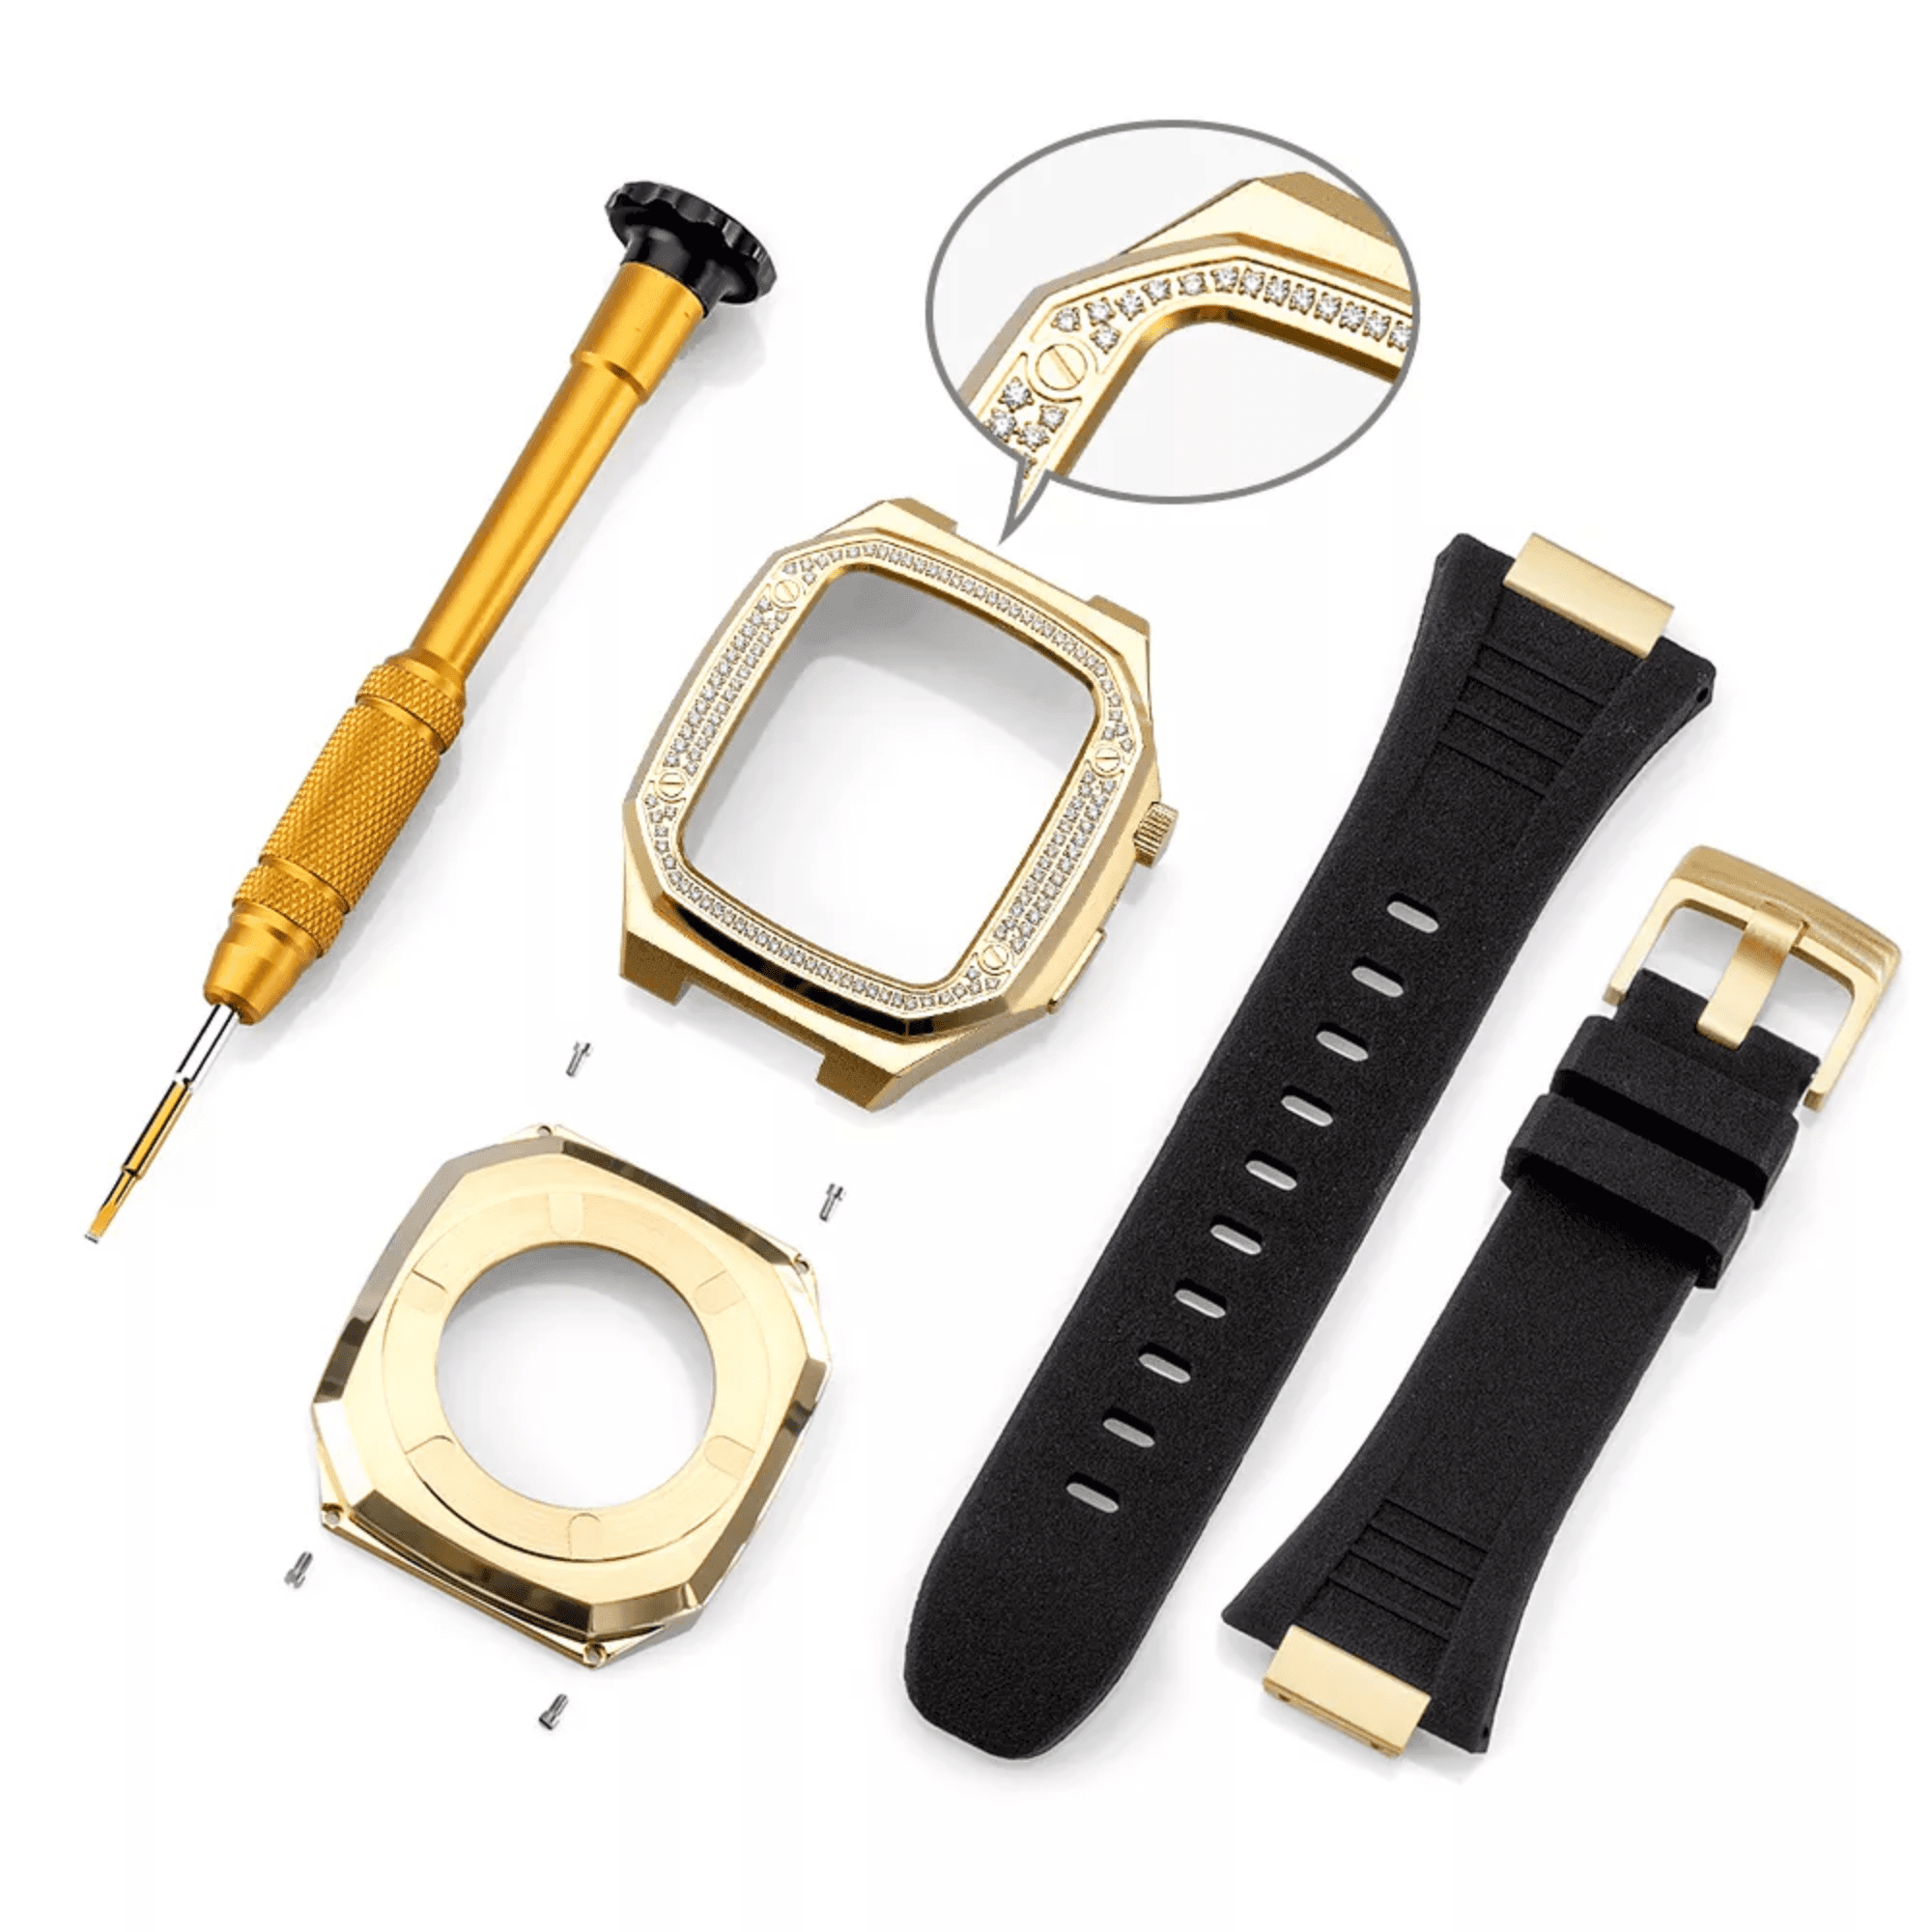 Luxury Metal Mod Kit for Apple Watch | Case with Jewels, Rubber & Stainless Steel Straps | Apple Watch SE/3/4/5/6 accessory - 45 mm| Rosè Gold case - Black Band mod kits india dream watches apple watch